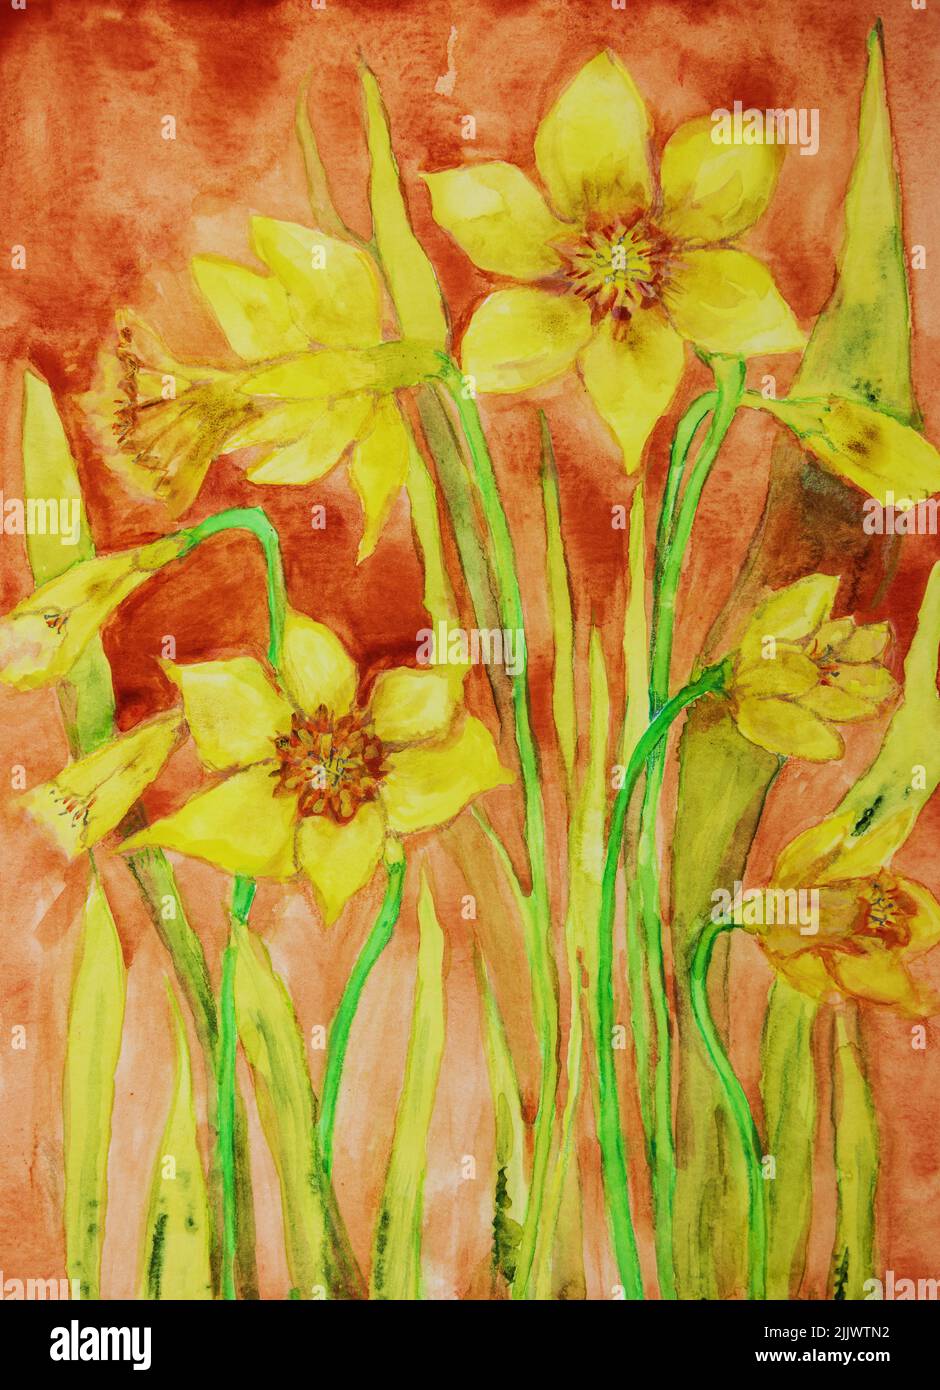 Daffodil with red background. The dabbing technique near the edges gives a soft focus effect due to the altered surface roughness of the paper. Stock Photo